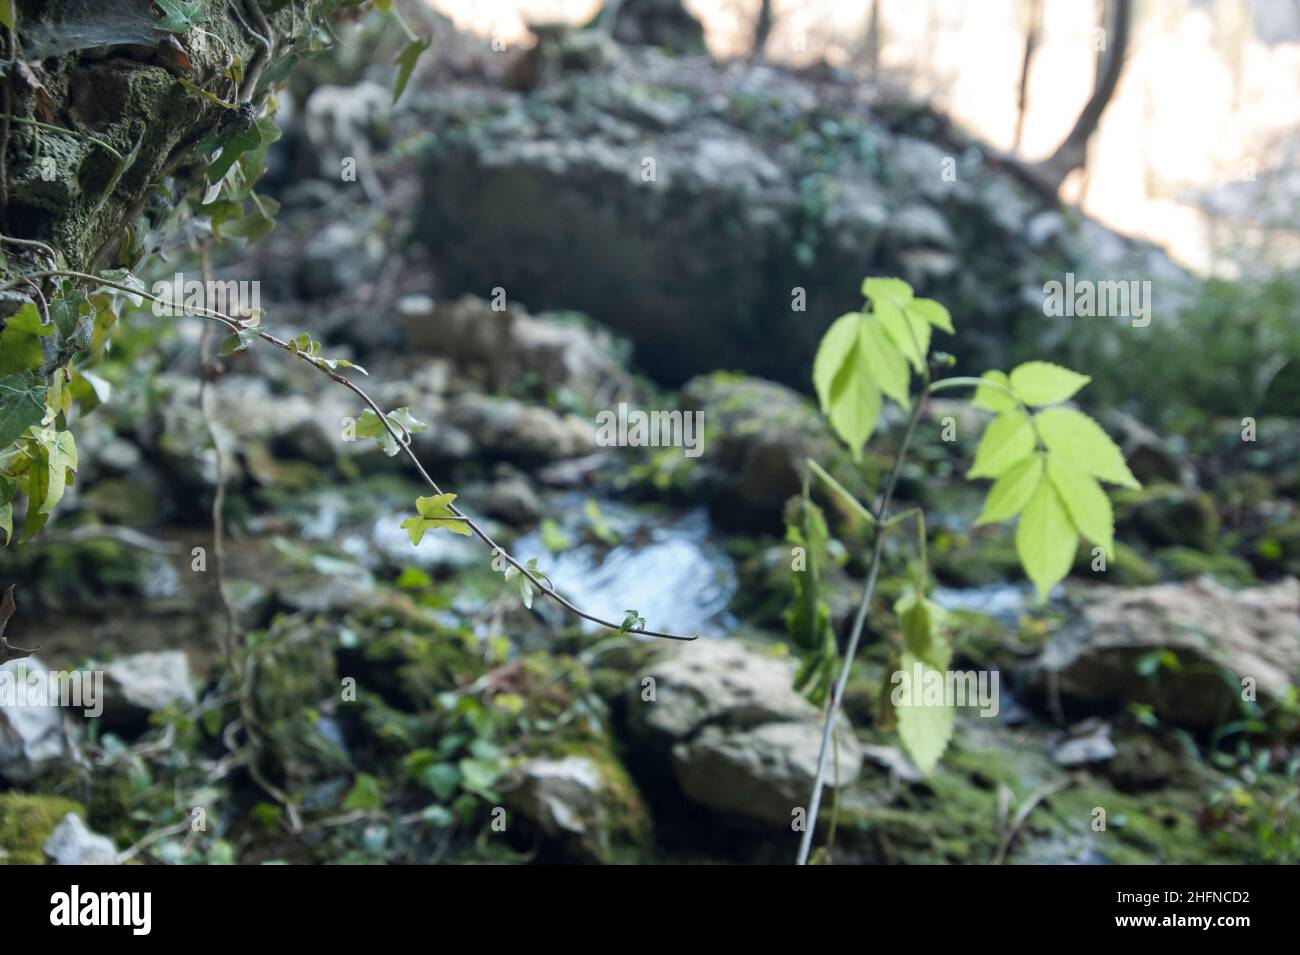 Water and rocks in the wild nature Stock Photo